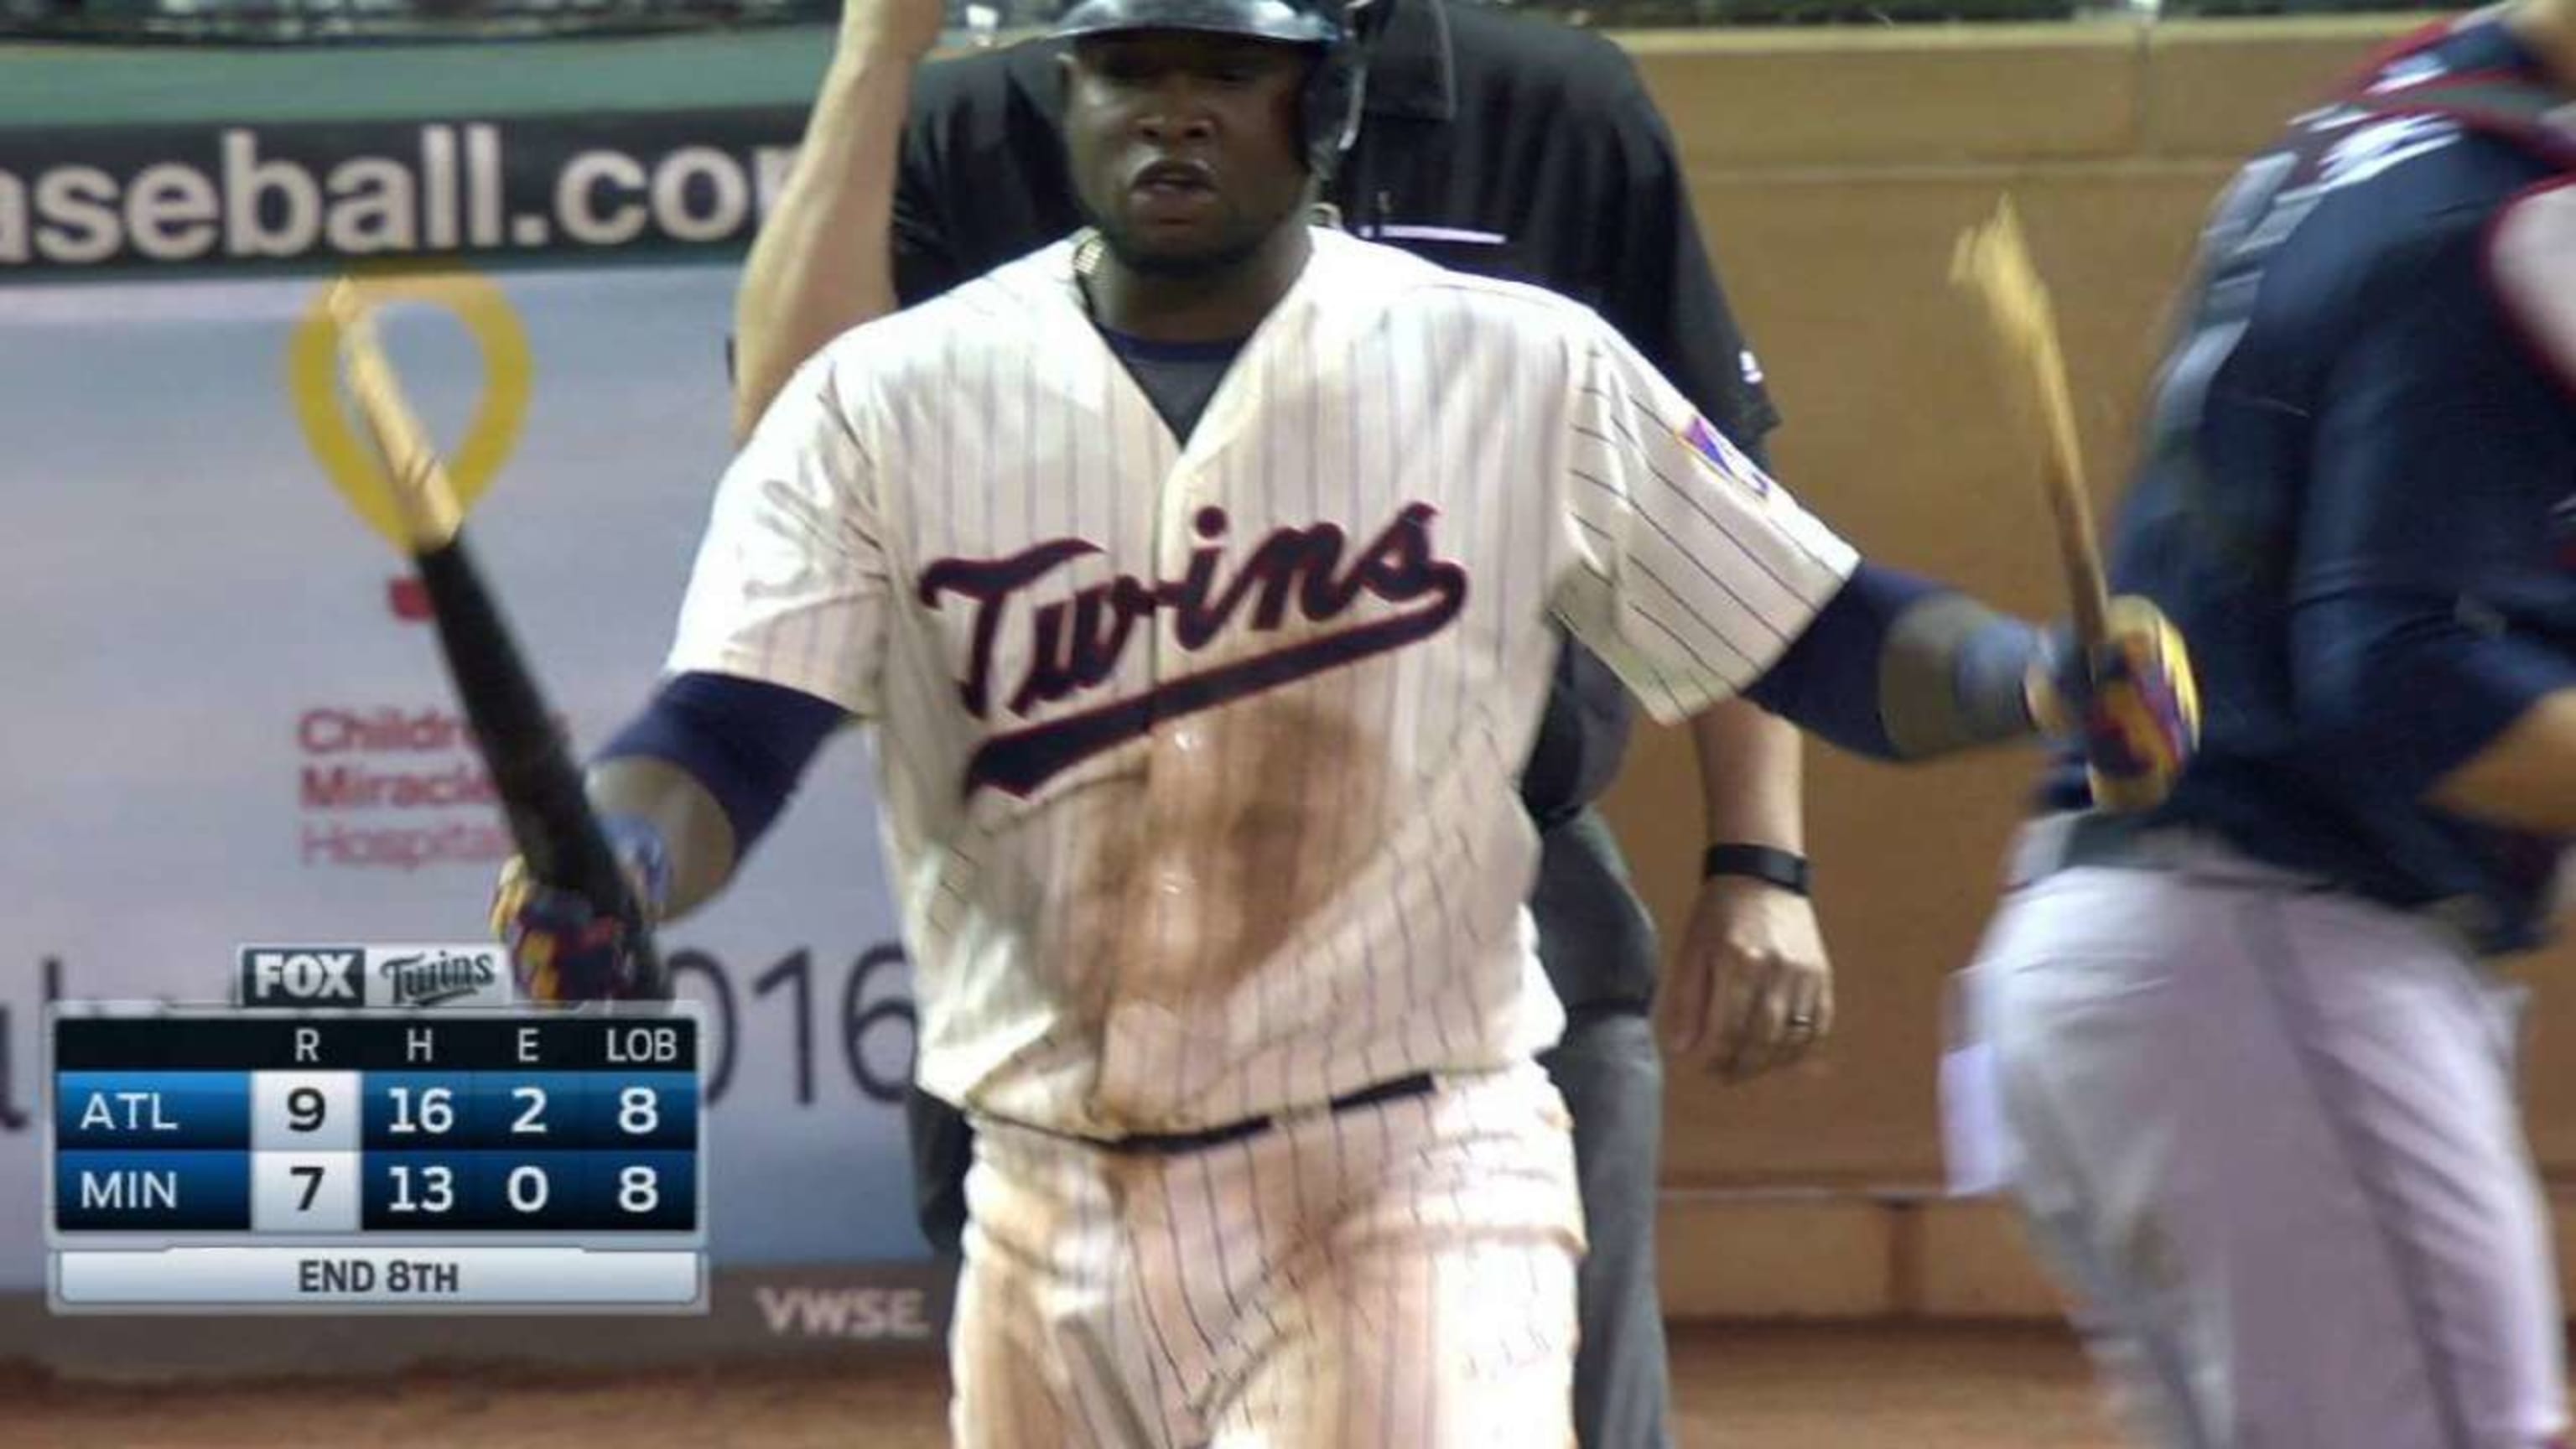 After striking out for a third time, Miguel Sano got very angry at his bat